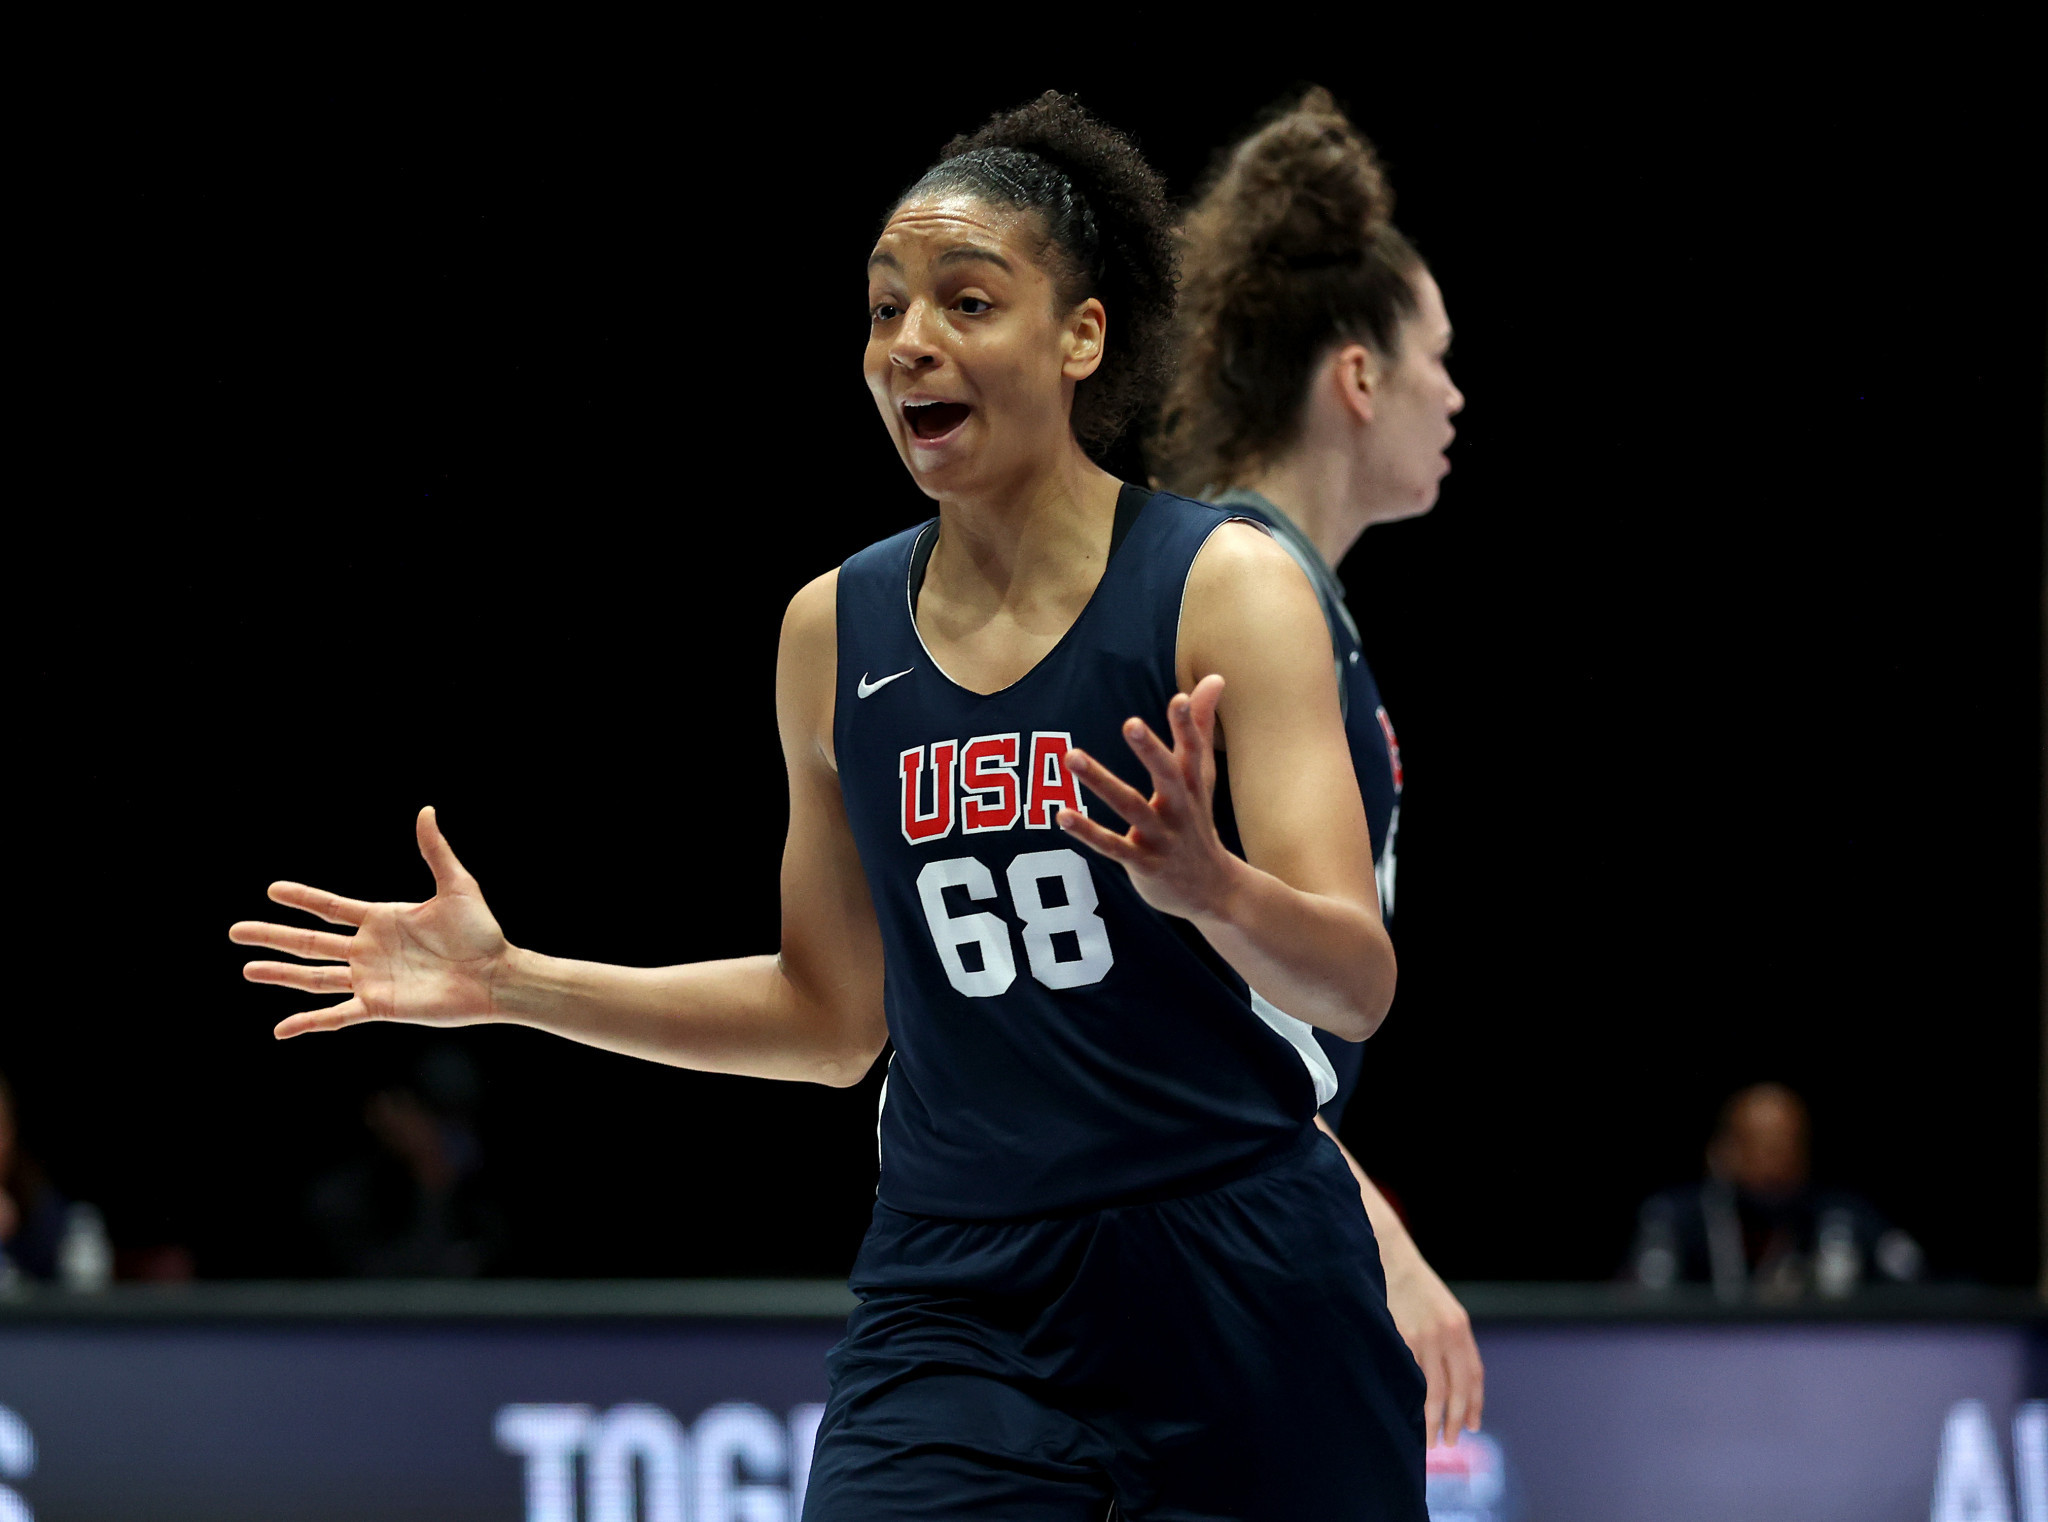 Cierra Burdick scored five points for the US in their 18-7 victory against Lithuania in the final of the FIBA 3x3 Women's Series event in Quebec ©Getty Images